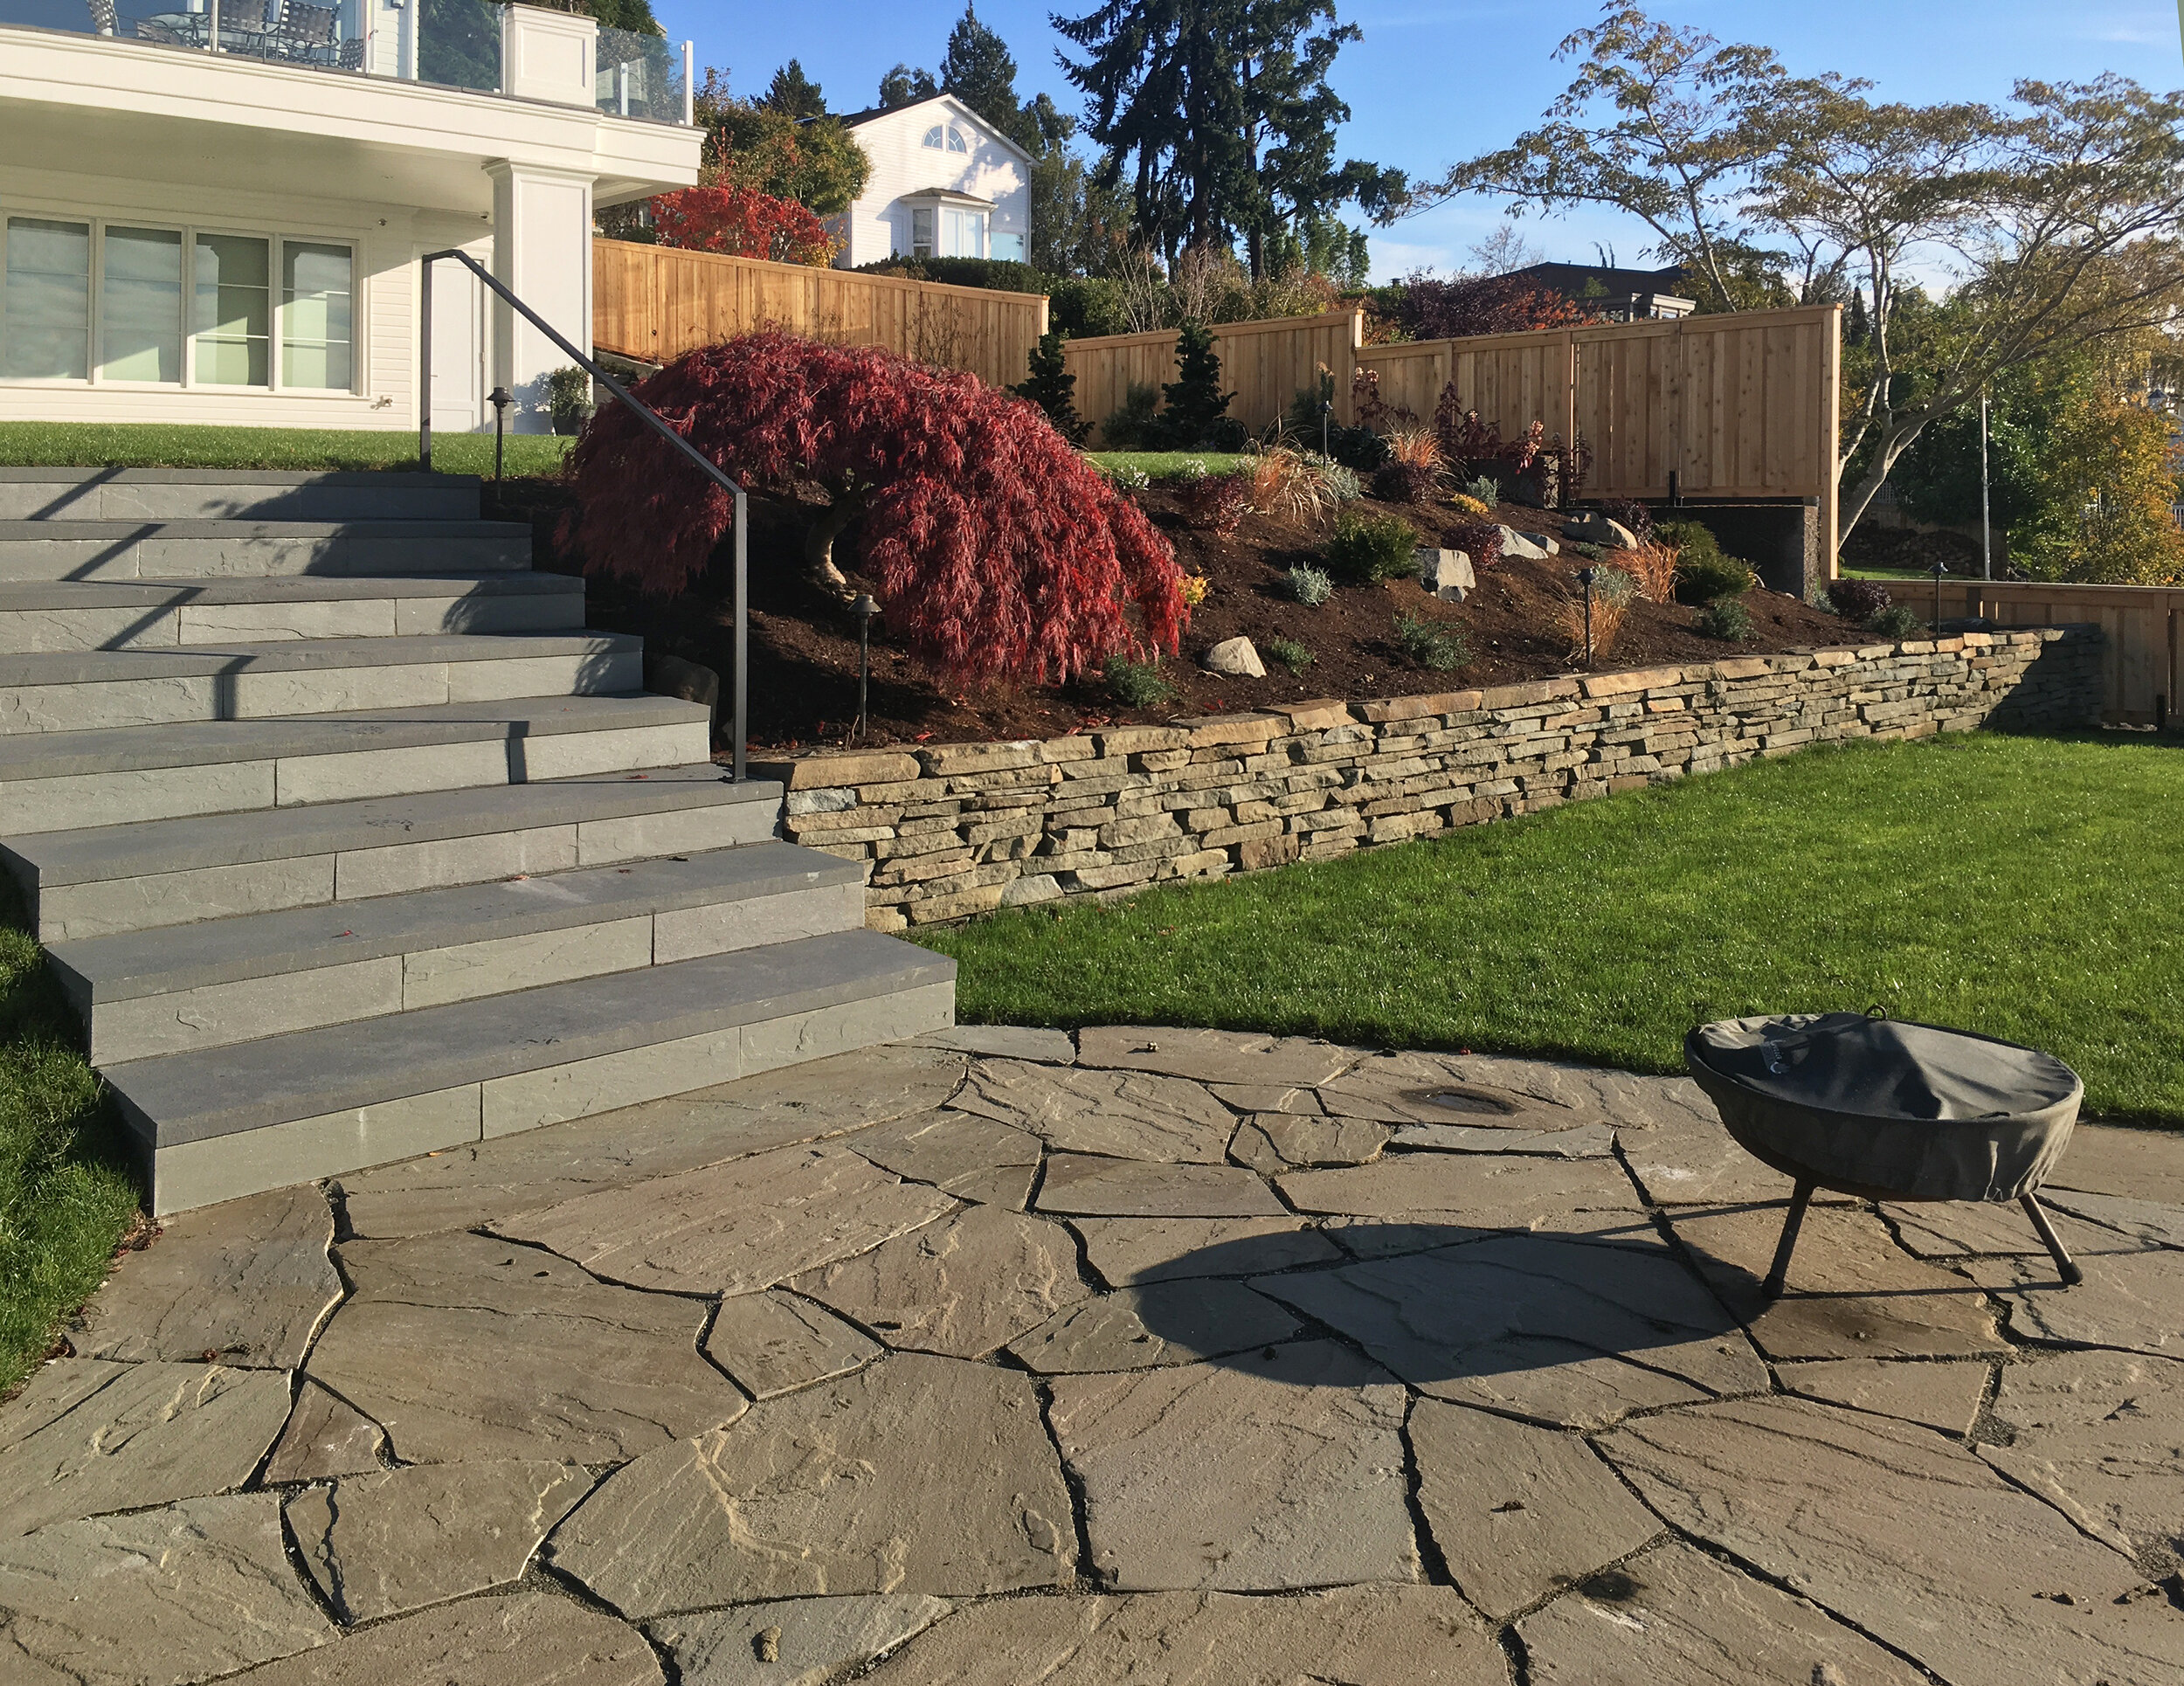 S3: Dry Stack Stone Wall, Flagstone Patio with Thermal-Treated Bluestone Steps